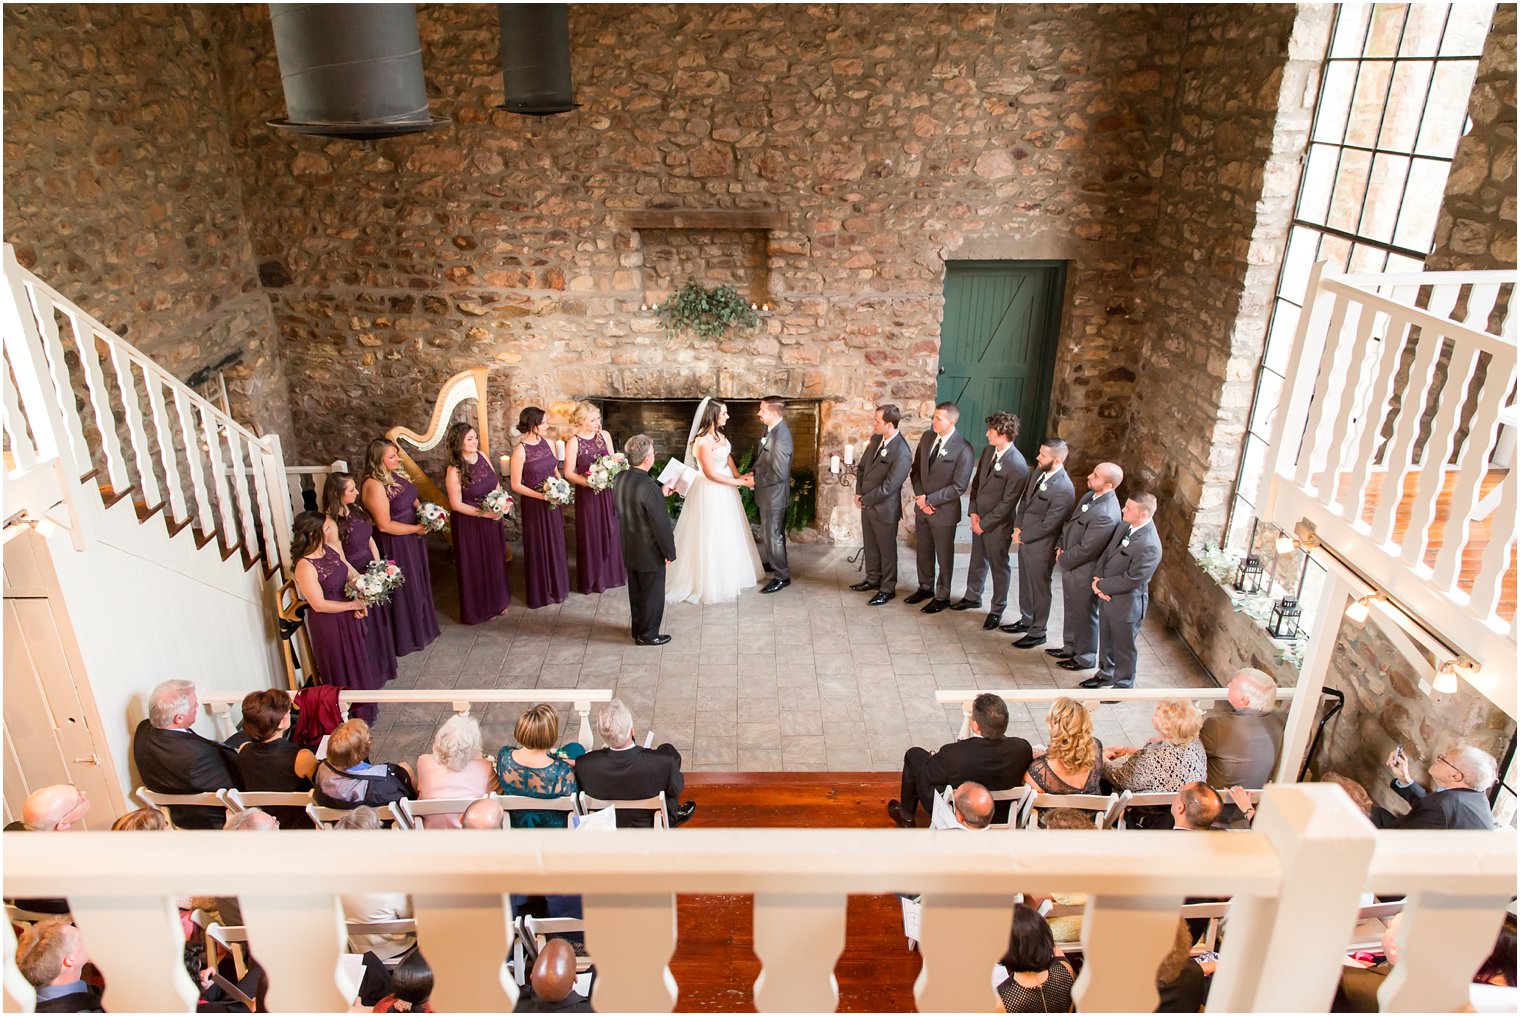 Wedding ceremony at Holly Hedge Estate in New Hope PA by PA Wedding Photographers Idalia Photography